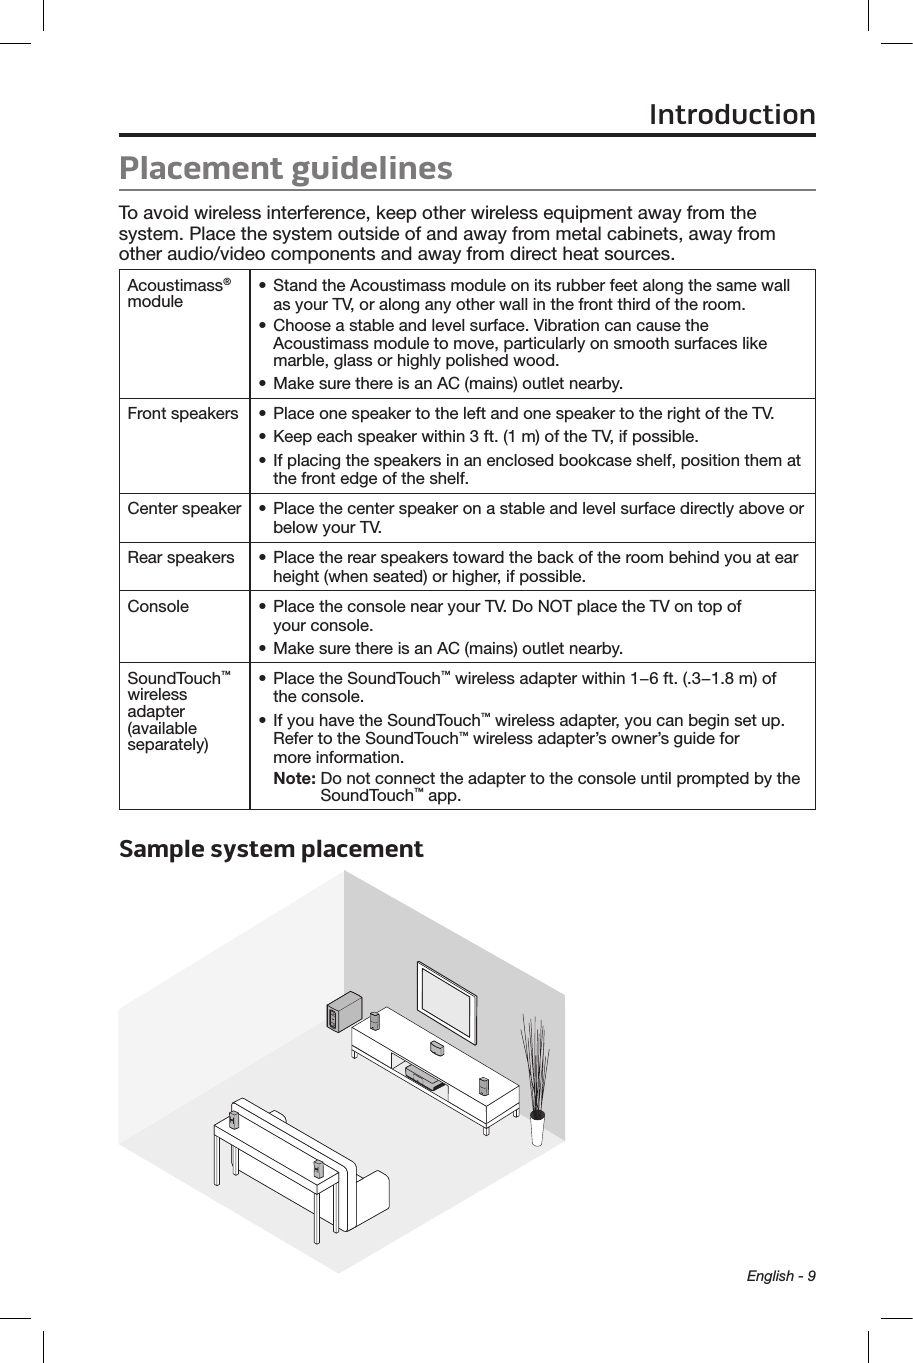 English - 9Placement guidelines To avoid wireless interference, keep other wireless equipment away from the system. Place the system outside of and away from metal cabinets, away from other audio/video components and away from direct heat sources. Acoustimass® module • Stand the Acoustimass module on its rubber feet along the same wall as your TV, or along any other wall in the front third of the room.• Choose a stable and level surface. Vibration can cause the Acoustimass module to move, particularly on smooth surfaces like marble, glass or highly polished wood.• Make sure there is an AC (mains) outlet nearby.Front speakers • Place one speaker to the left and one speaker to the right of the TV.• Keep each speaker within 3 ft. (1 m) of the TV, if possible.• If placing the speakers in an enclosed bookcase shelf, position them at the front edge of the shelf.Center speaker • Place the center speaker on a stable and level surface directly above or below your TV.Rear speakers • Place the rear speakers toward the back of the room behind you at ear height (when seated) or higher, if possible.Console • Place the console near your TV. Do NOT place the TV on top of  your console.• Make sure there is an AC (mains) outlet nearby.SoundTouch™ wireless adapter (available separately)• Place the SoundTouch™ wireless adapter within 1−6 ft. (.3−1.8 m) of  the console.• If you have the SoundTouch™ wireless adapter, you can begin set up. Refer to the SoundTouch™ wireless adapter’s owner’s guide for  more information.Note:  Do not connect the adapter to the console until prompted by the SoundTouch™ app.Sample system placement Introduction